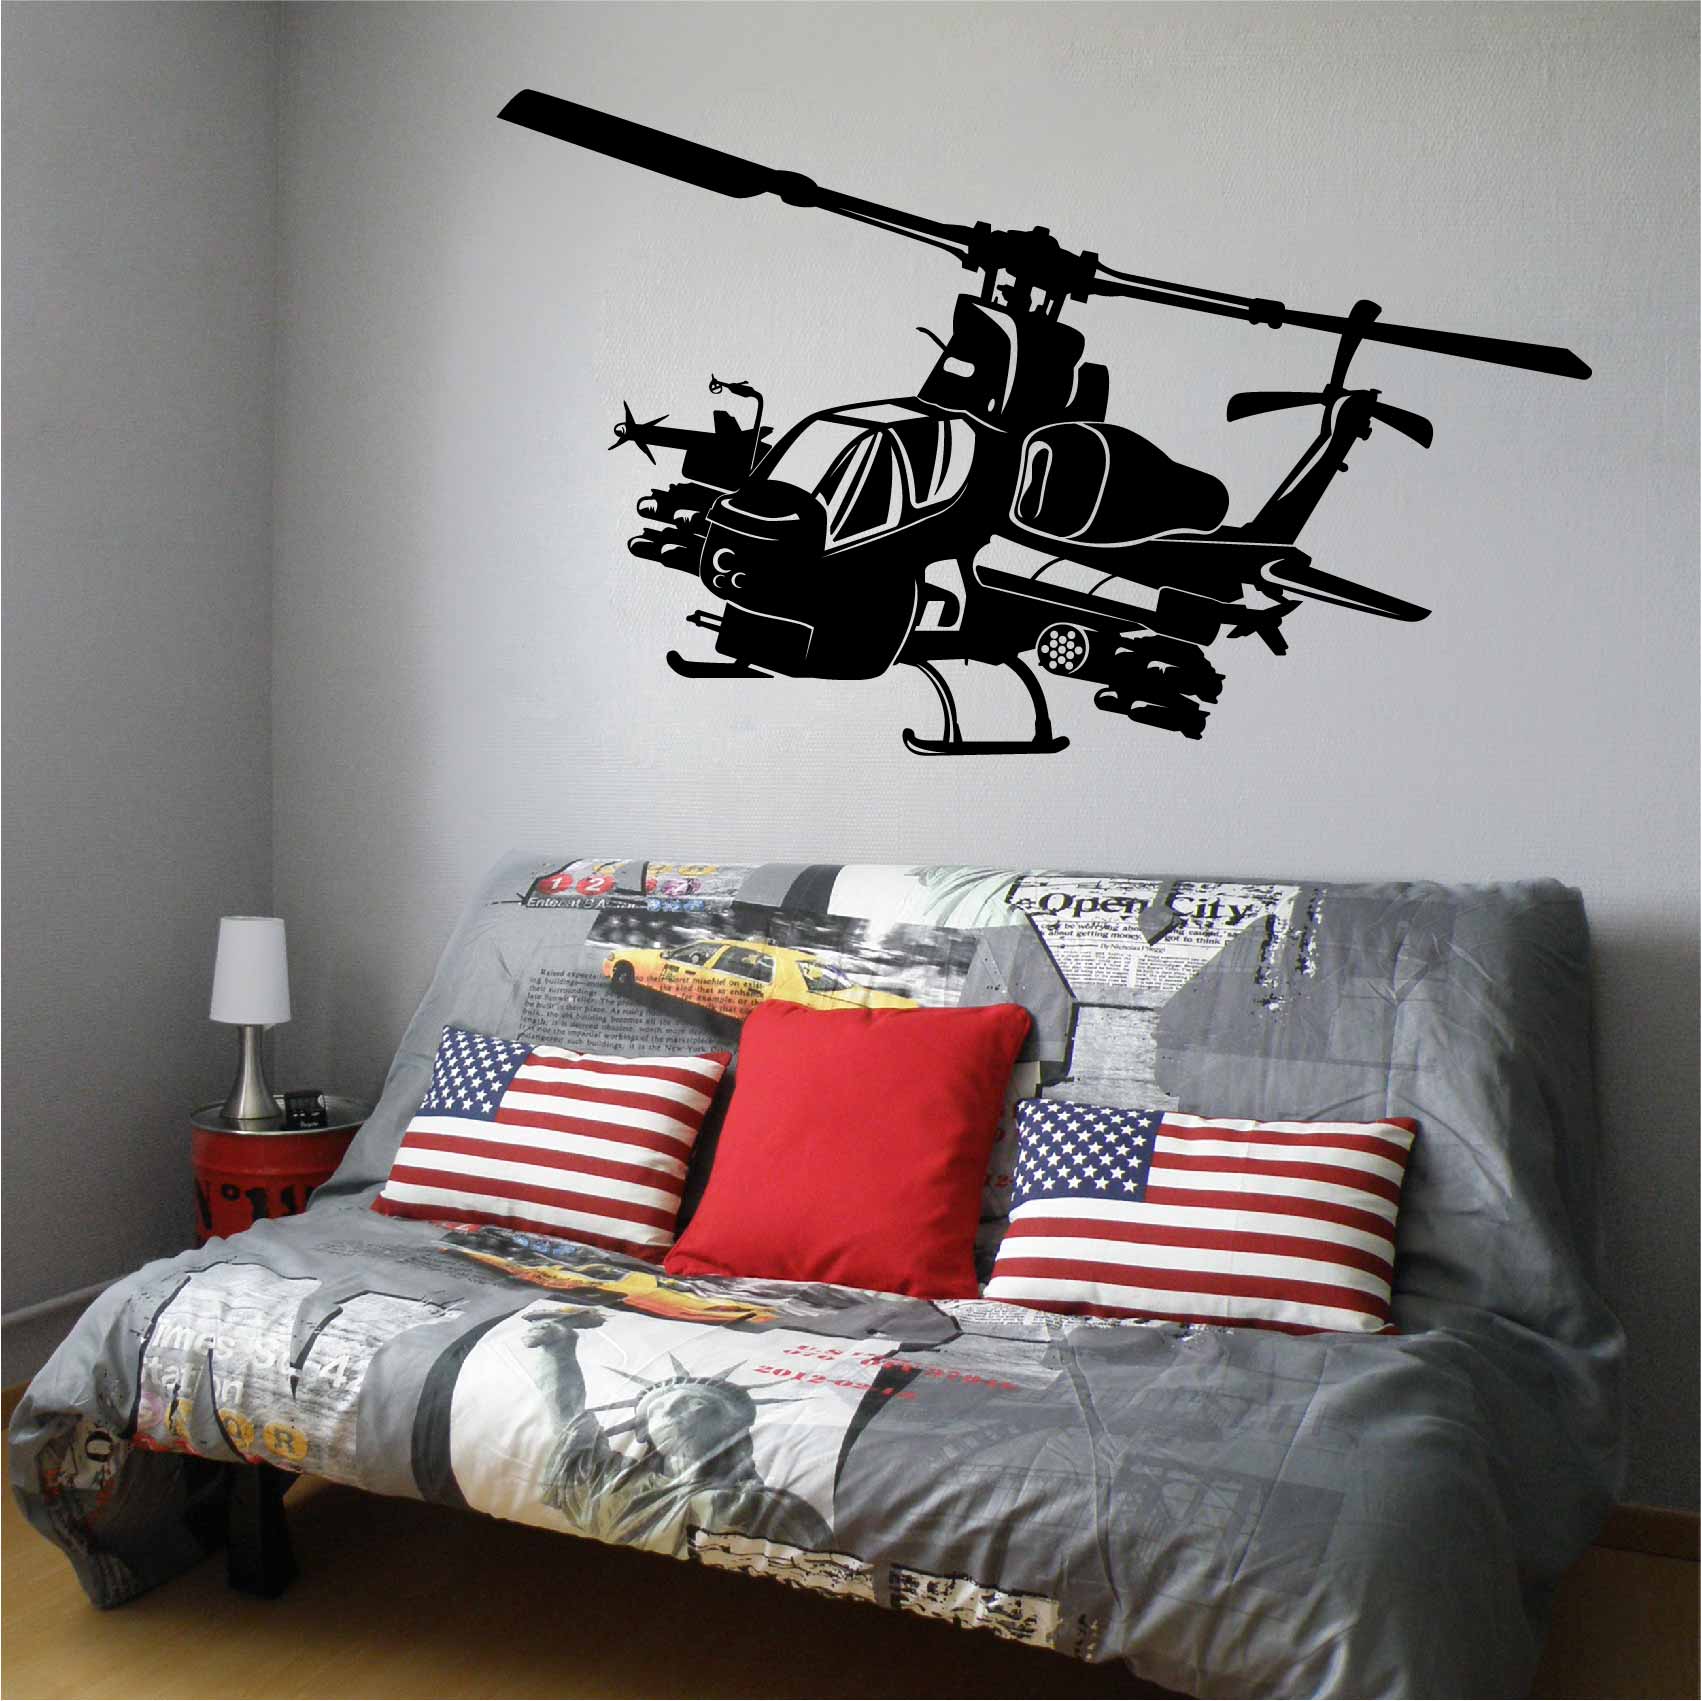 stickers-helicoptere-combat-ref5helicoptere-stickers-muraux-helicoptere-autocollant-deco-chambre-enfant-sticker-mural-hélicoptère